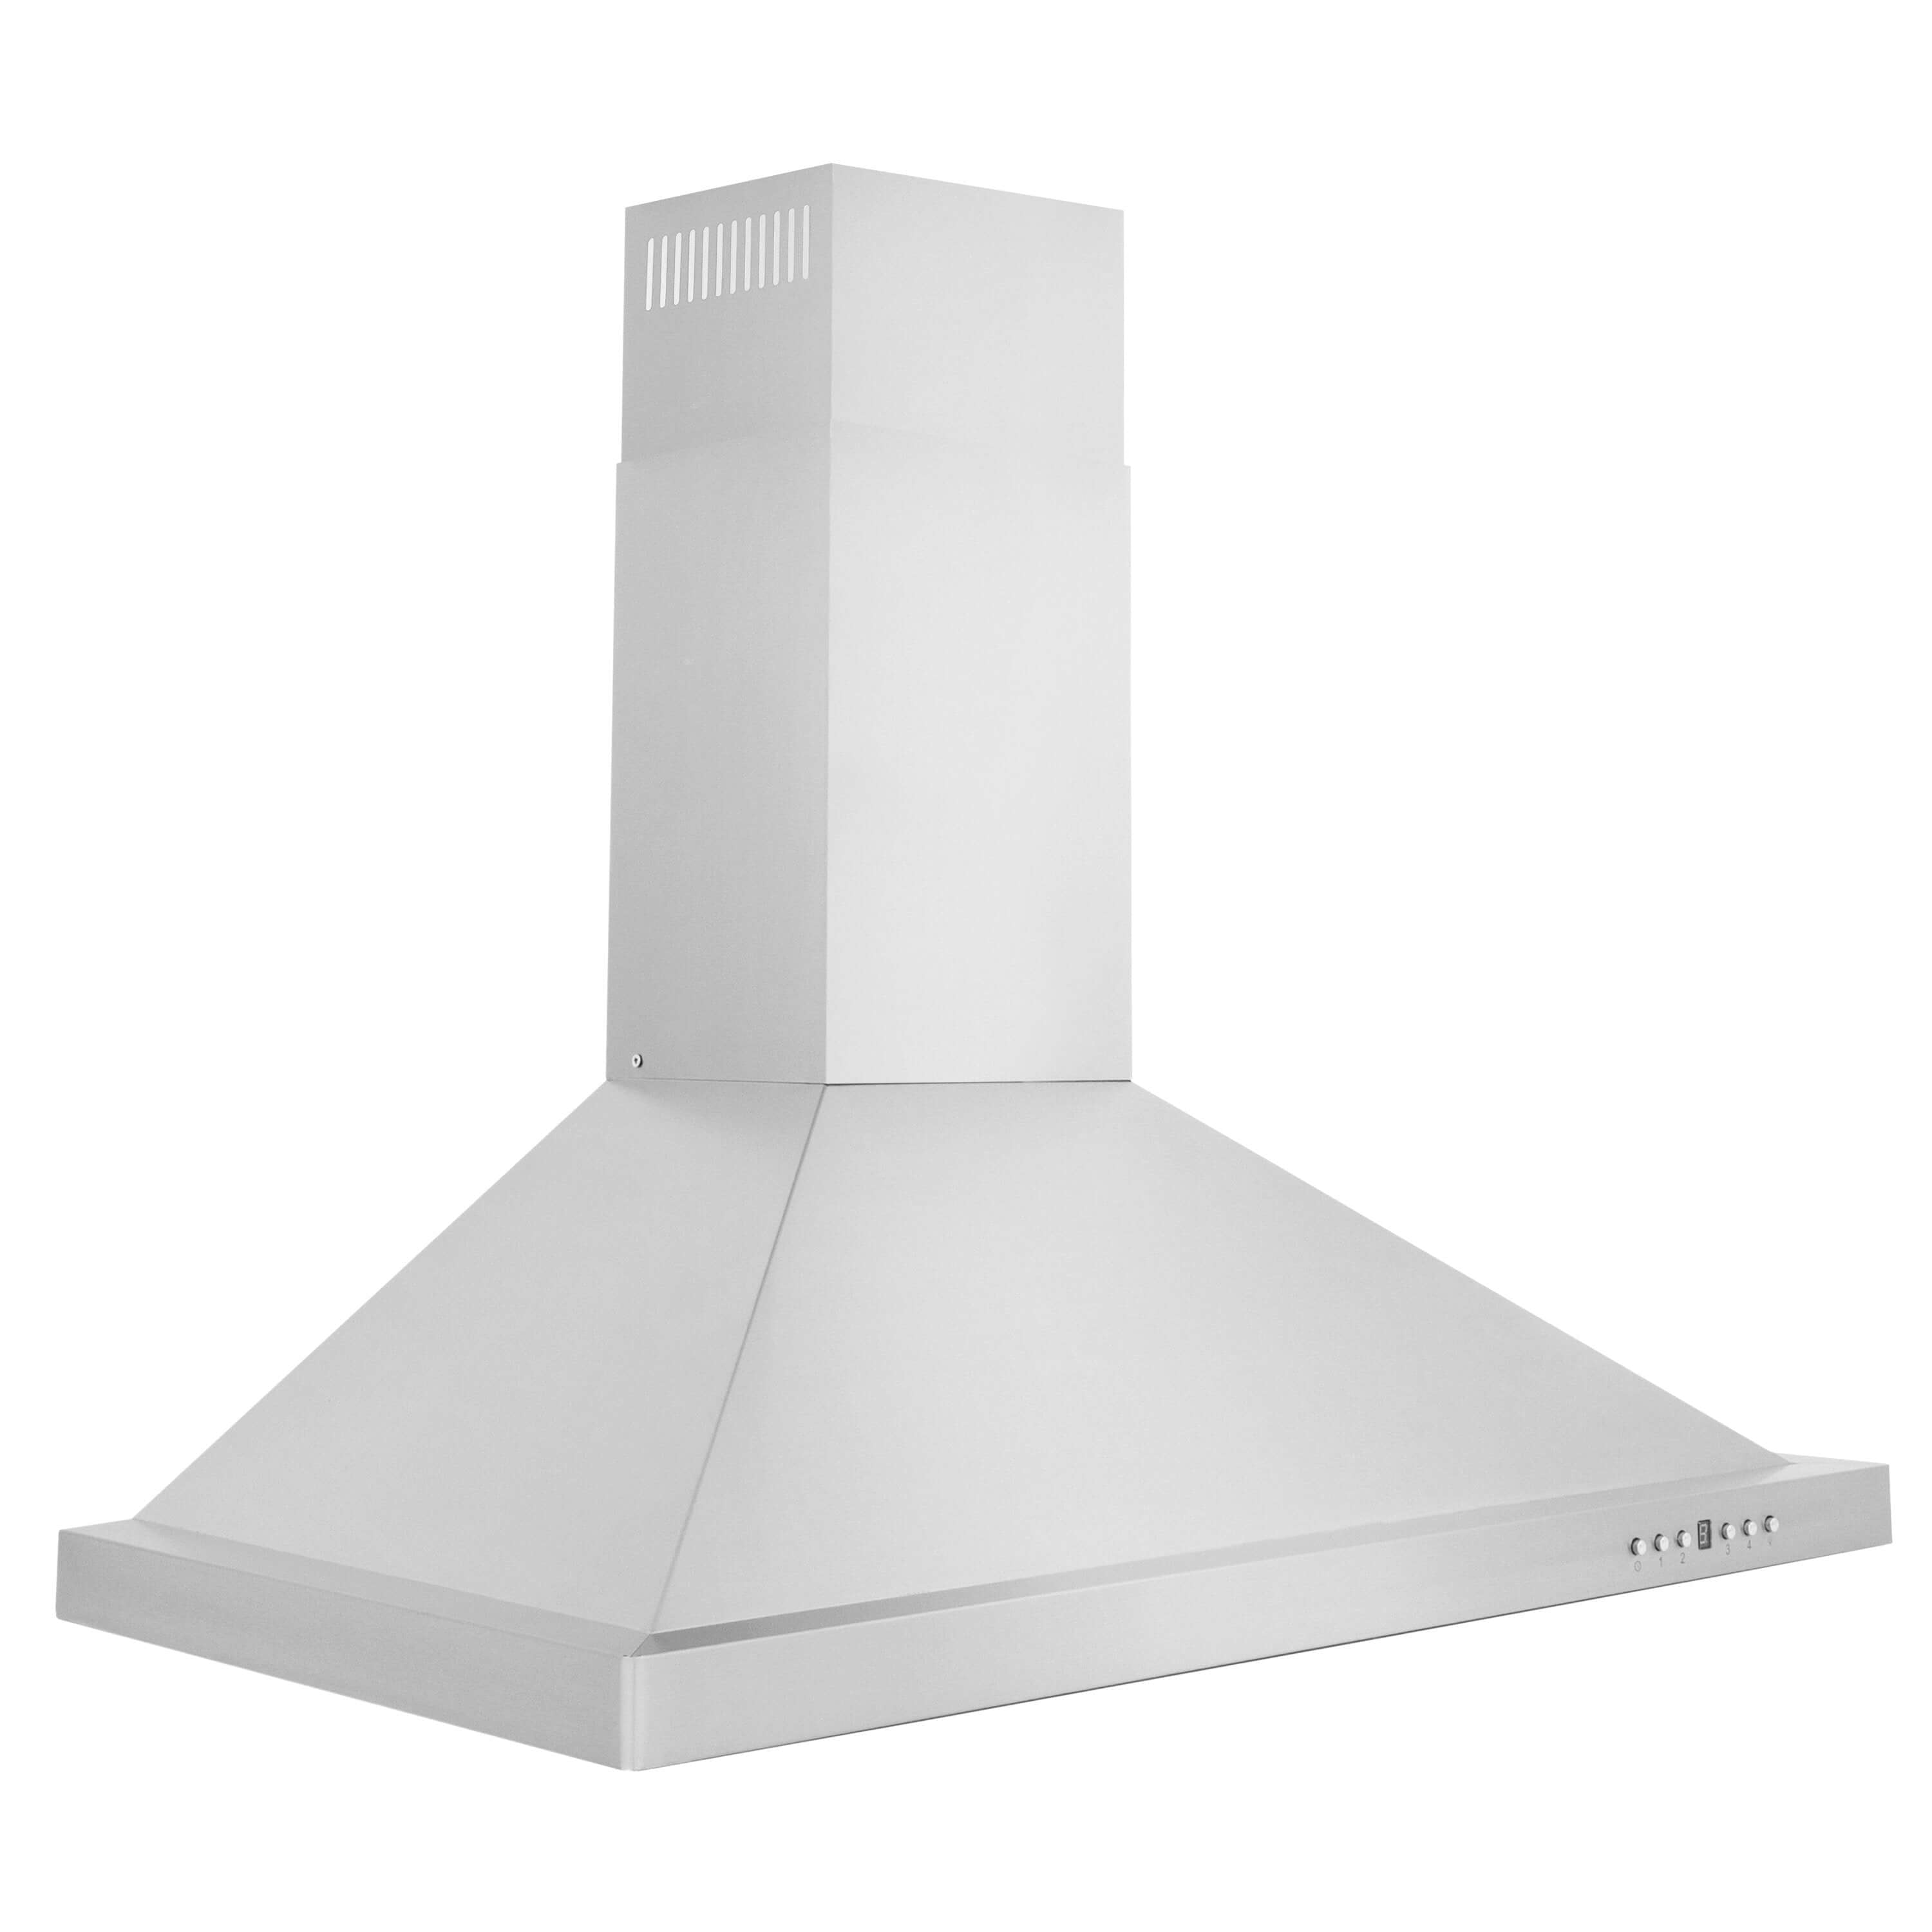 ZLINE 36 in. Recirculating Wall Mount Range Hood with Charcoal Filters in Stainless Steel (KB-CF-36) side.